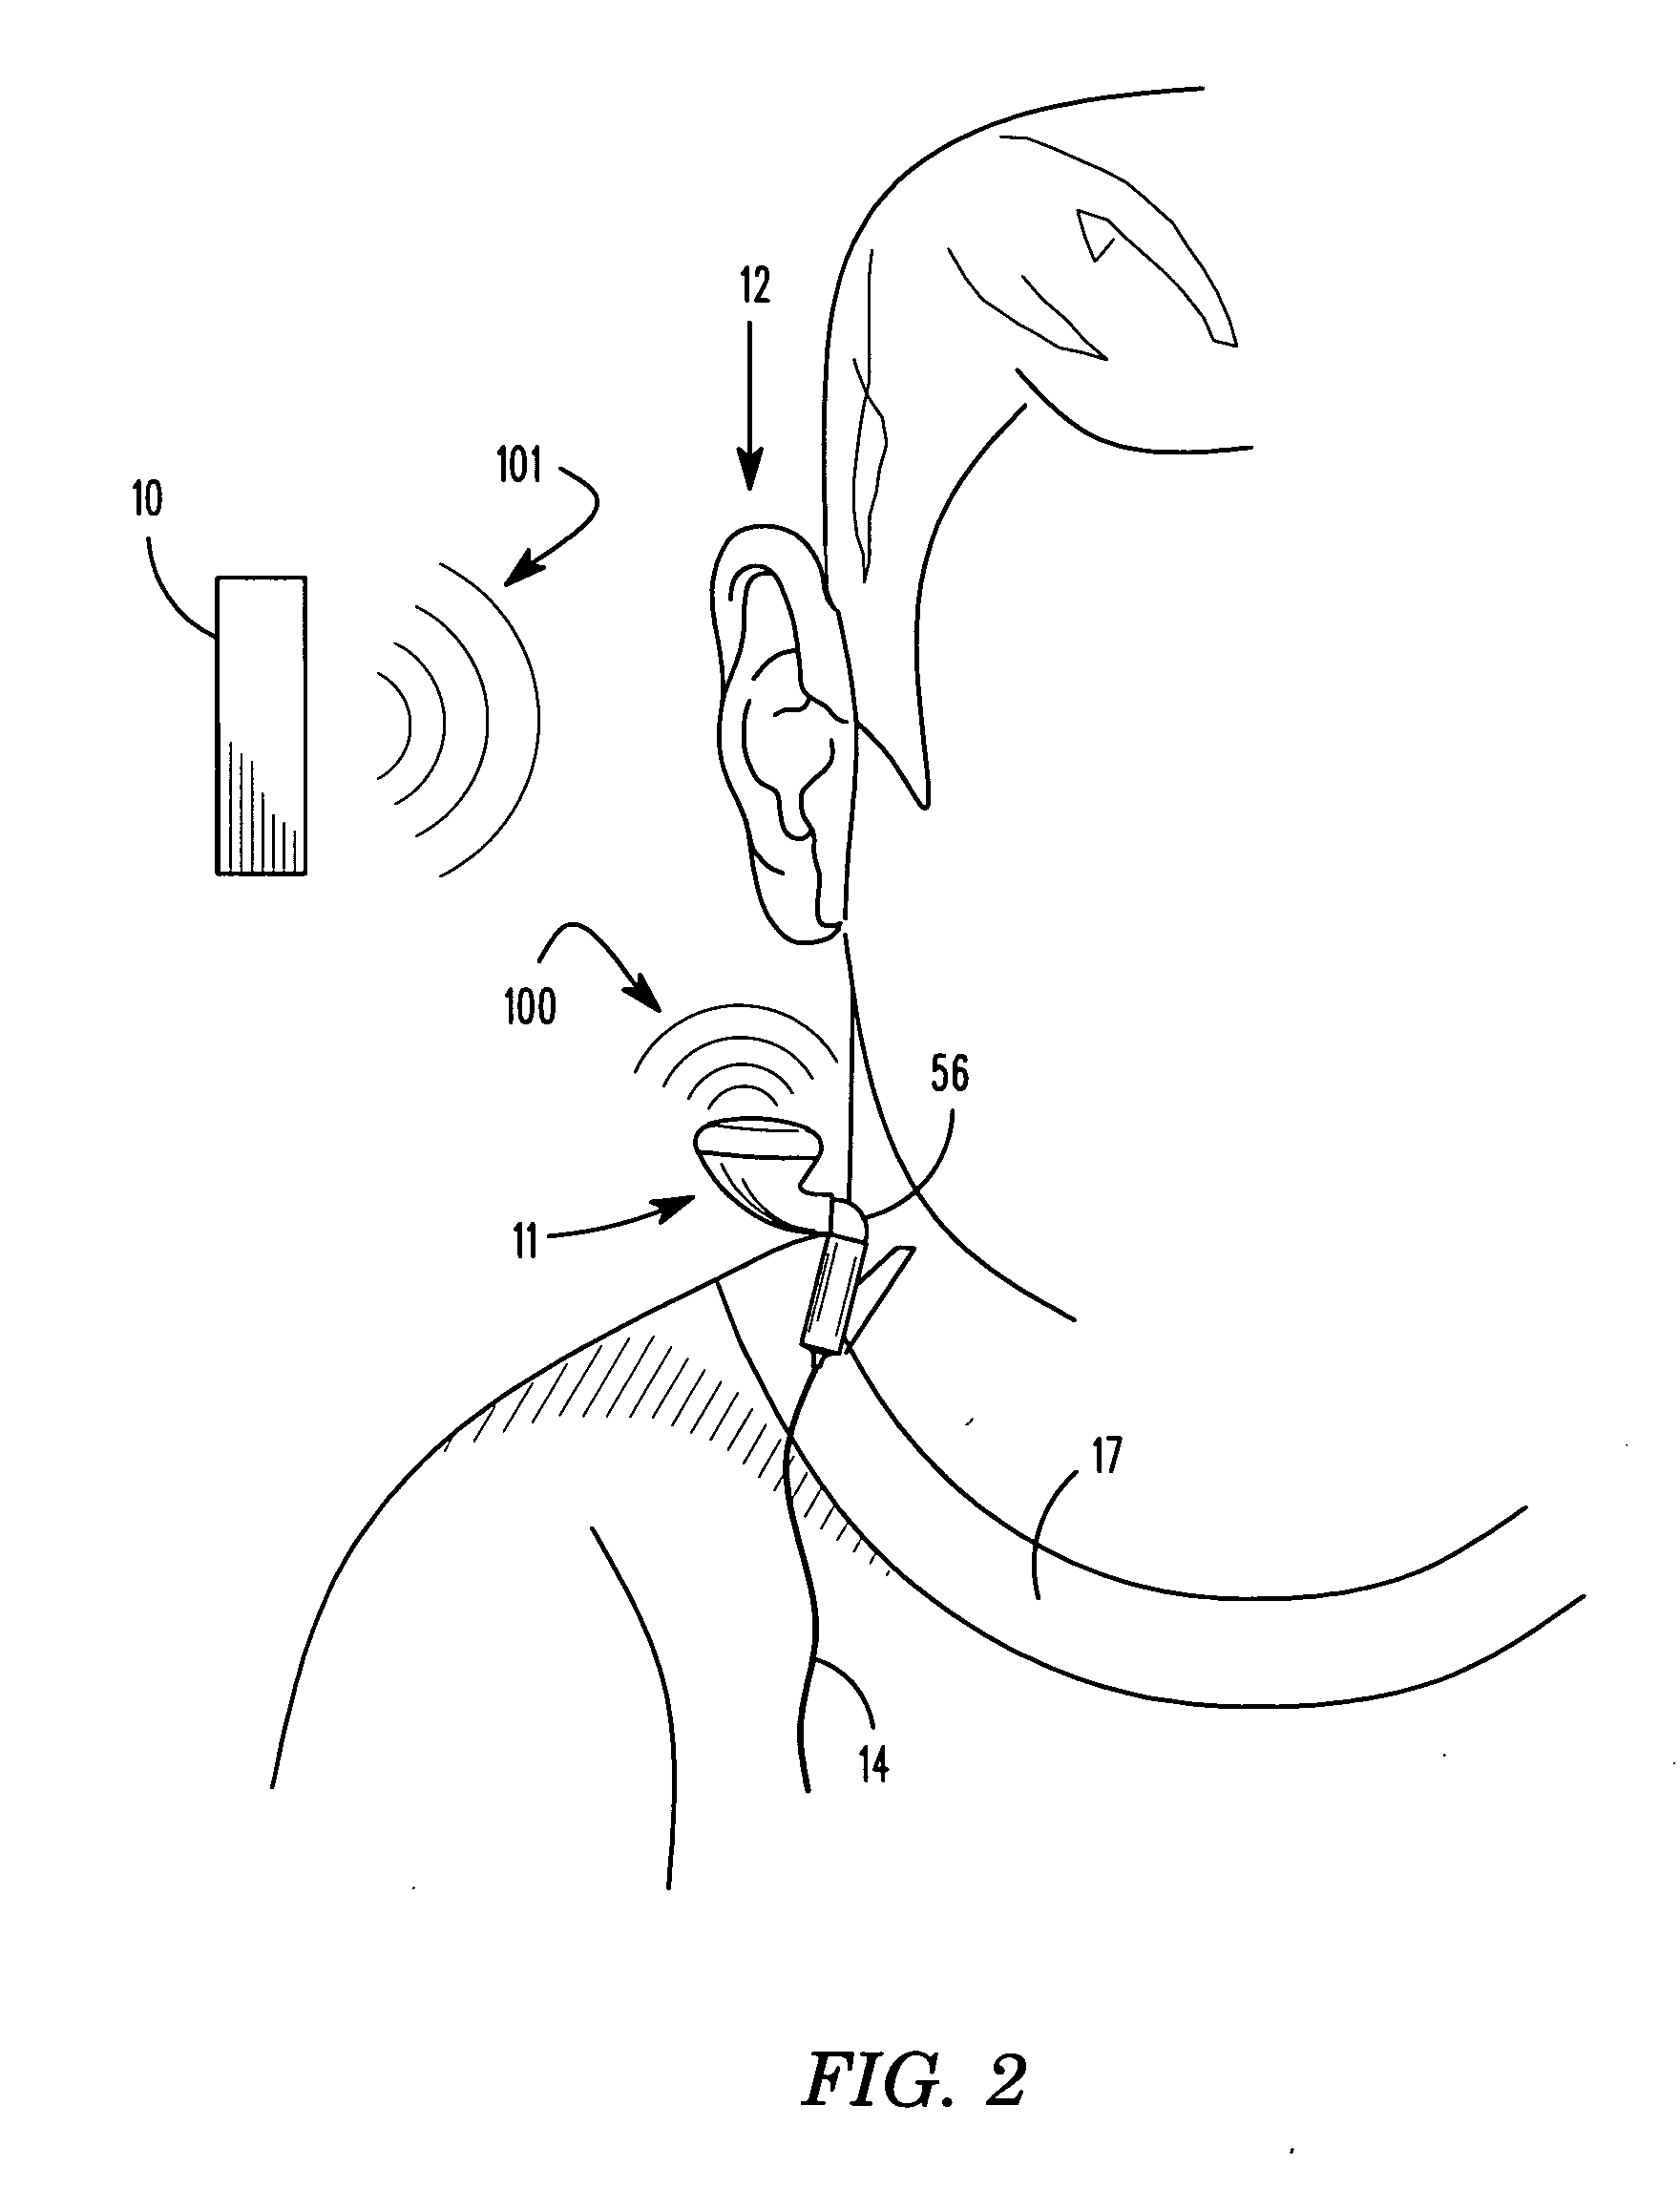 Earphone system, apparatus, and method for enhancing personal safety